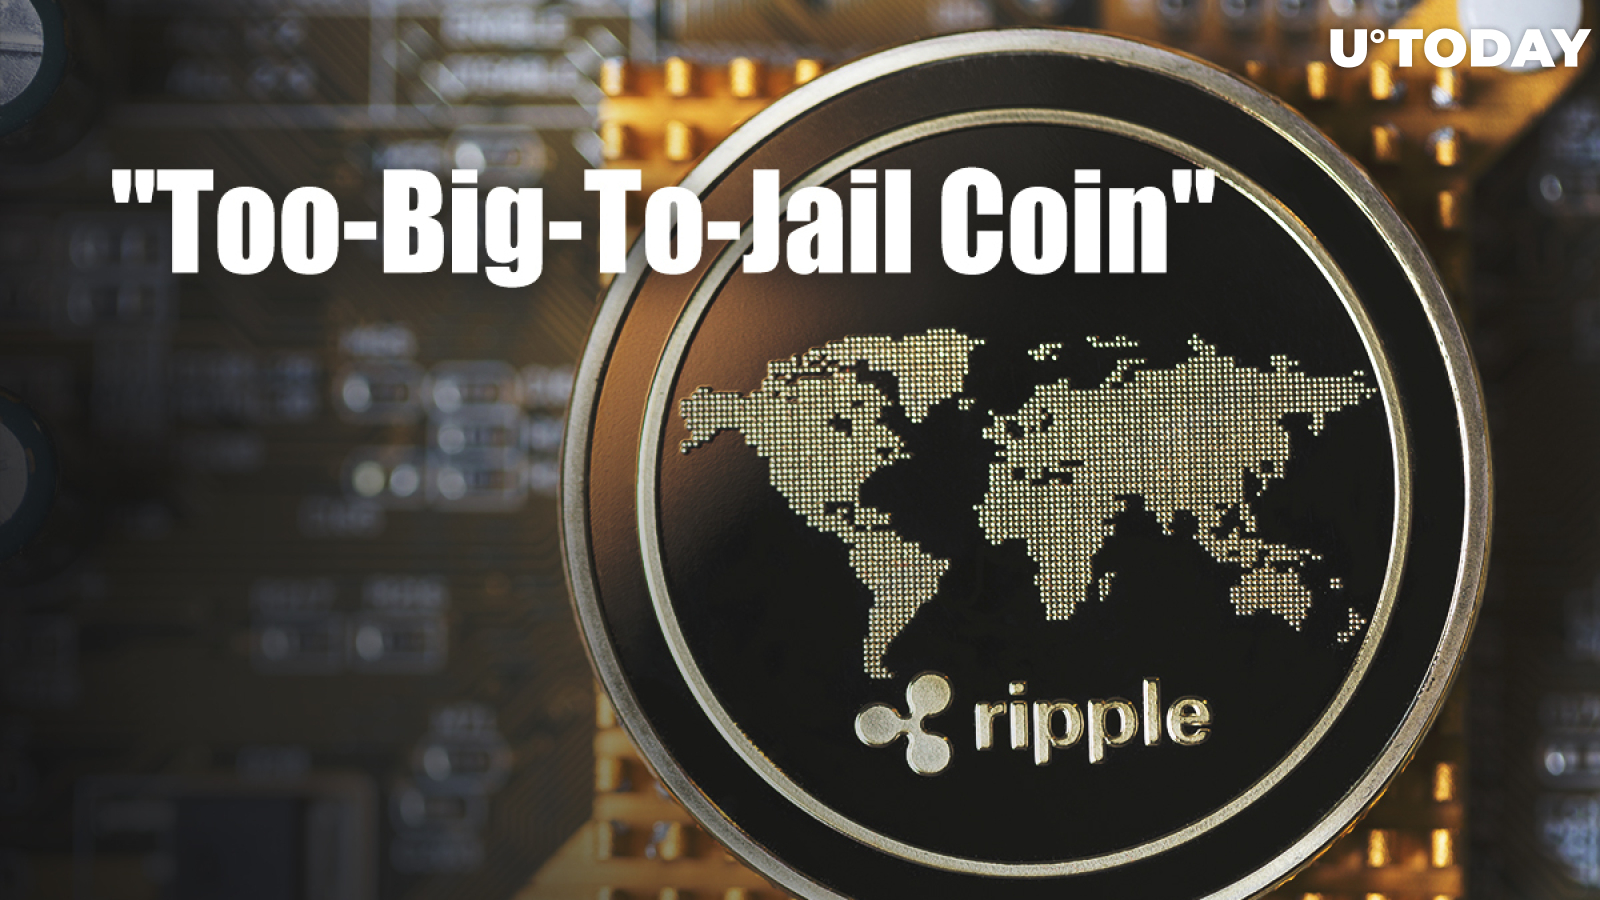 Ripple's XRP Called "Too-Big-To-Jail Coin" by Messari Founder 